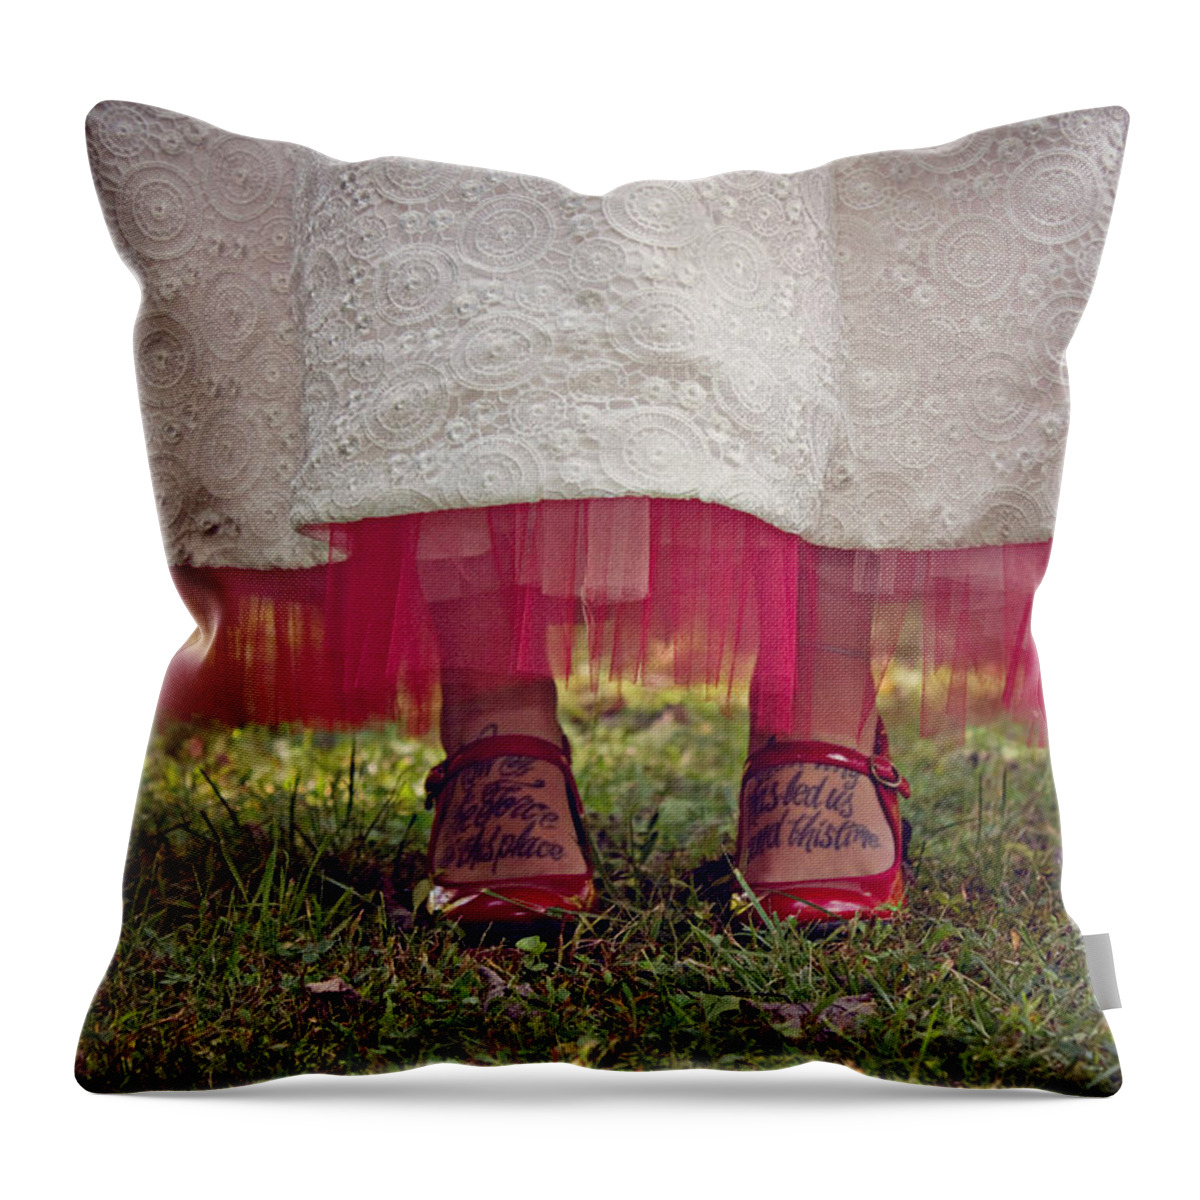 Red Throw Pillow featuring the photograph This Place This Time by Jessica Brawley